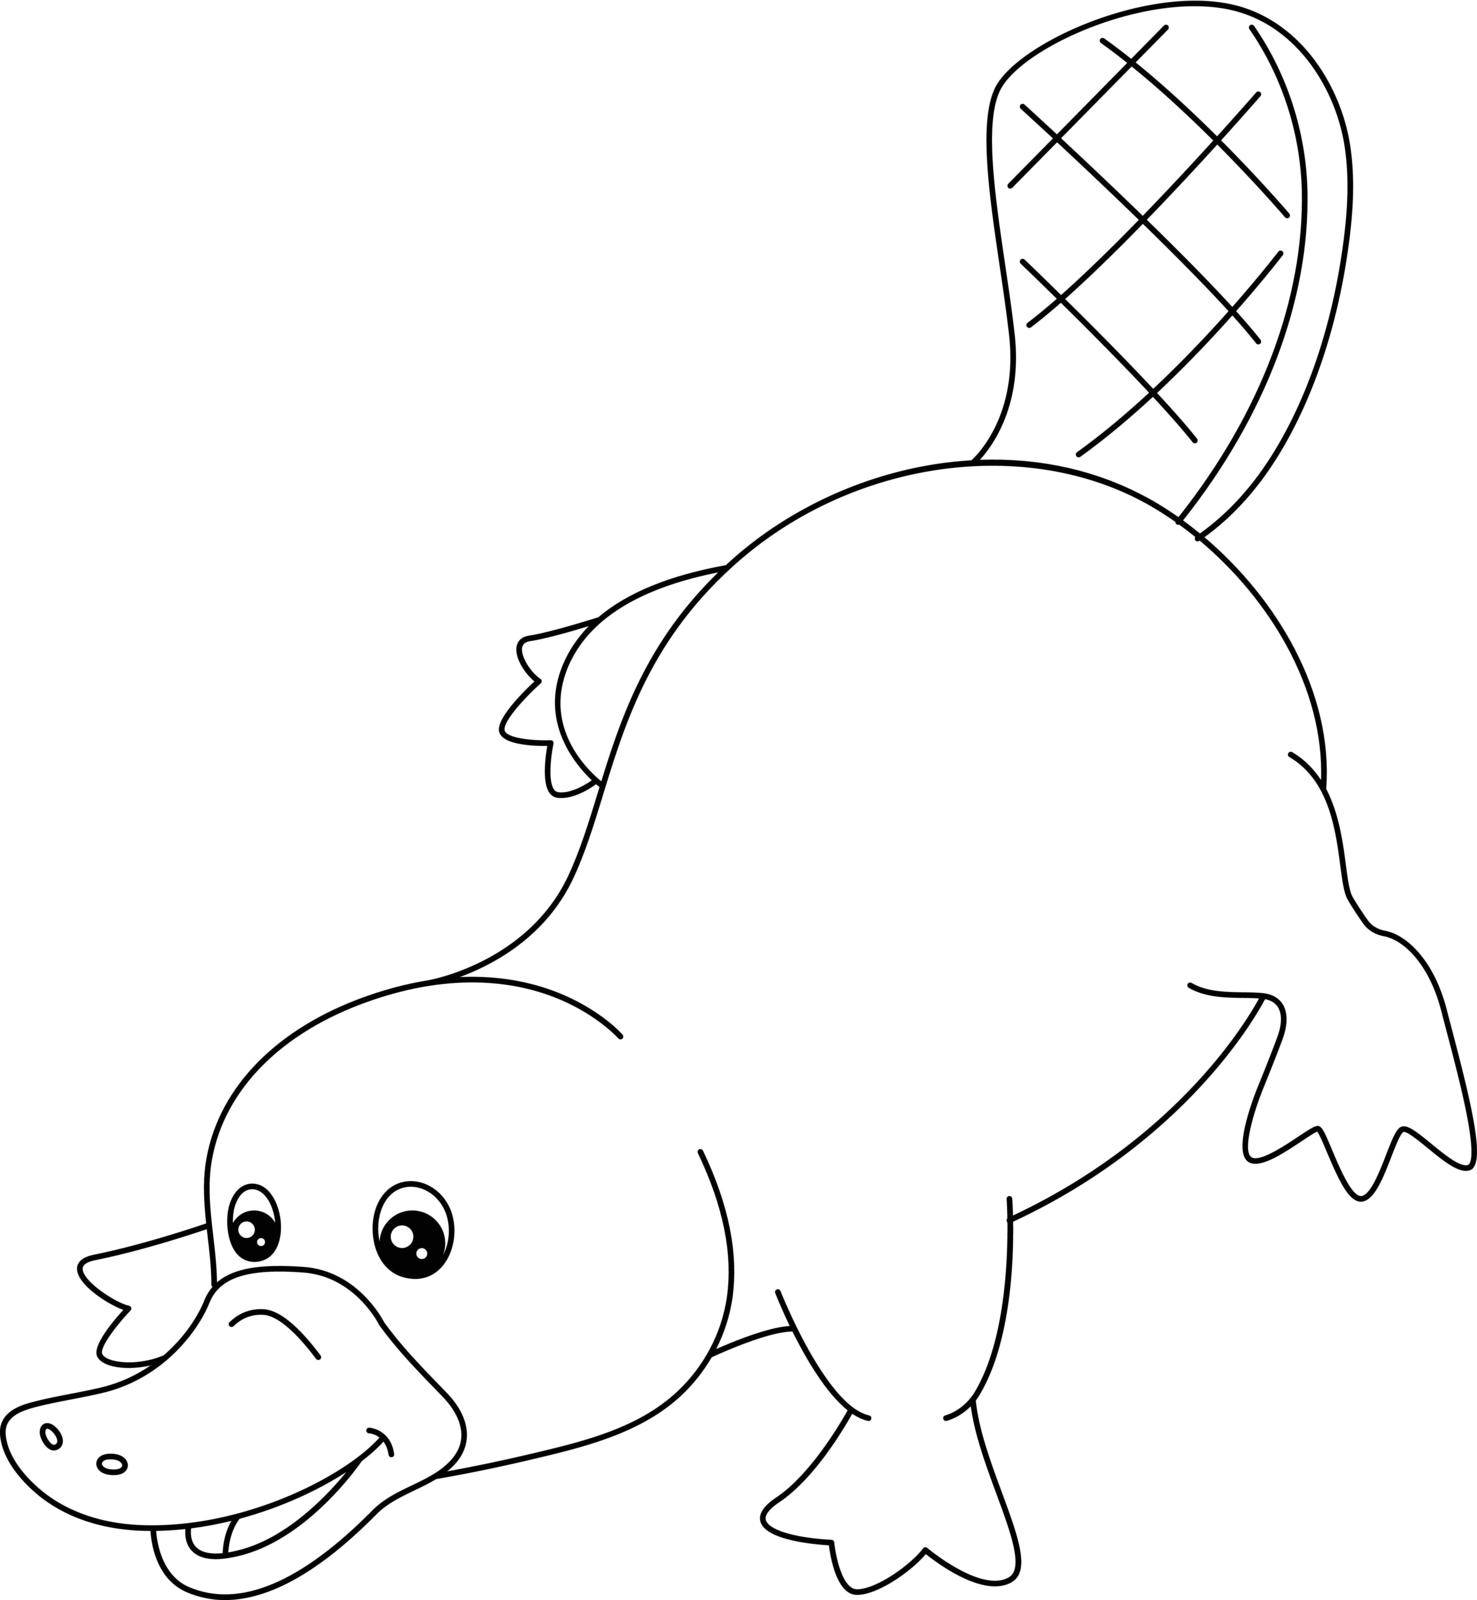 Platypus Coloring Page Isolated for Kids by abbydesign